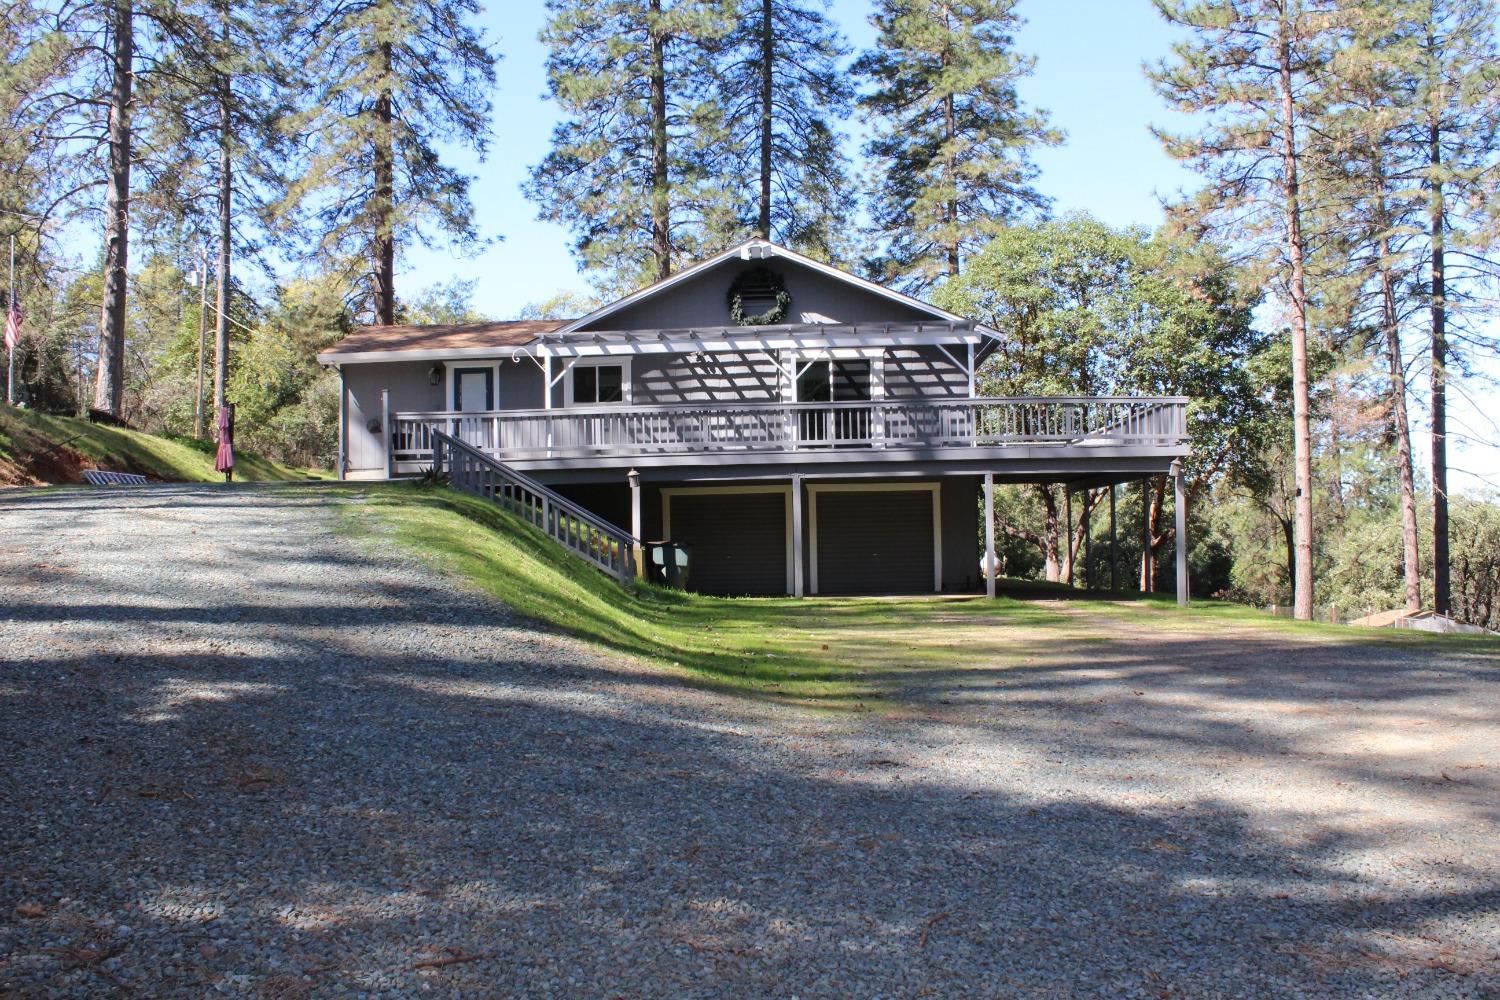 Photo of 14121 Toma Ln in Pine Grove, CA